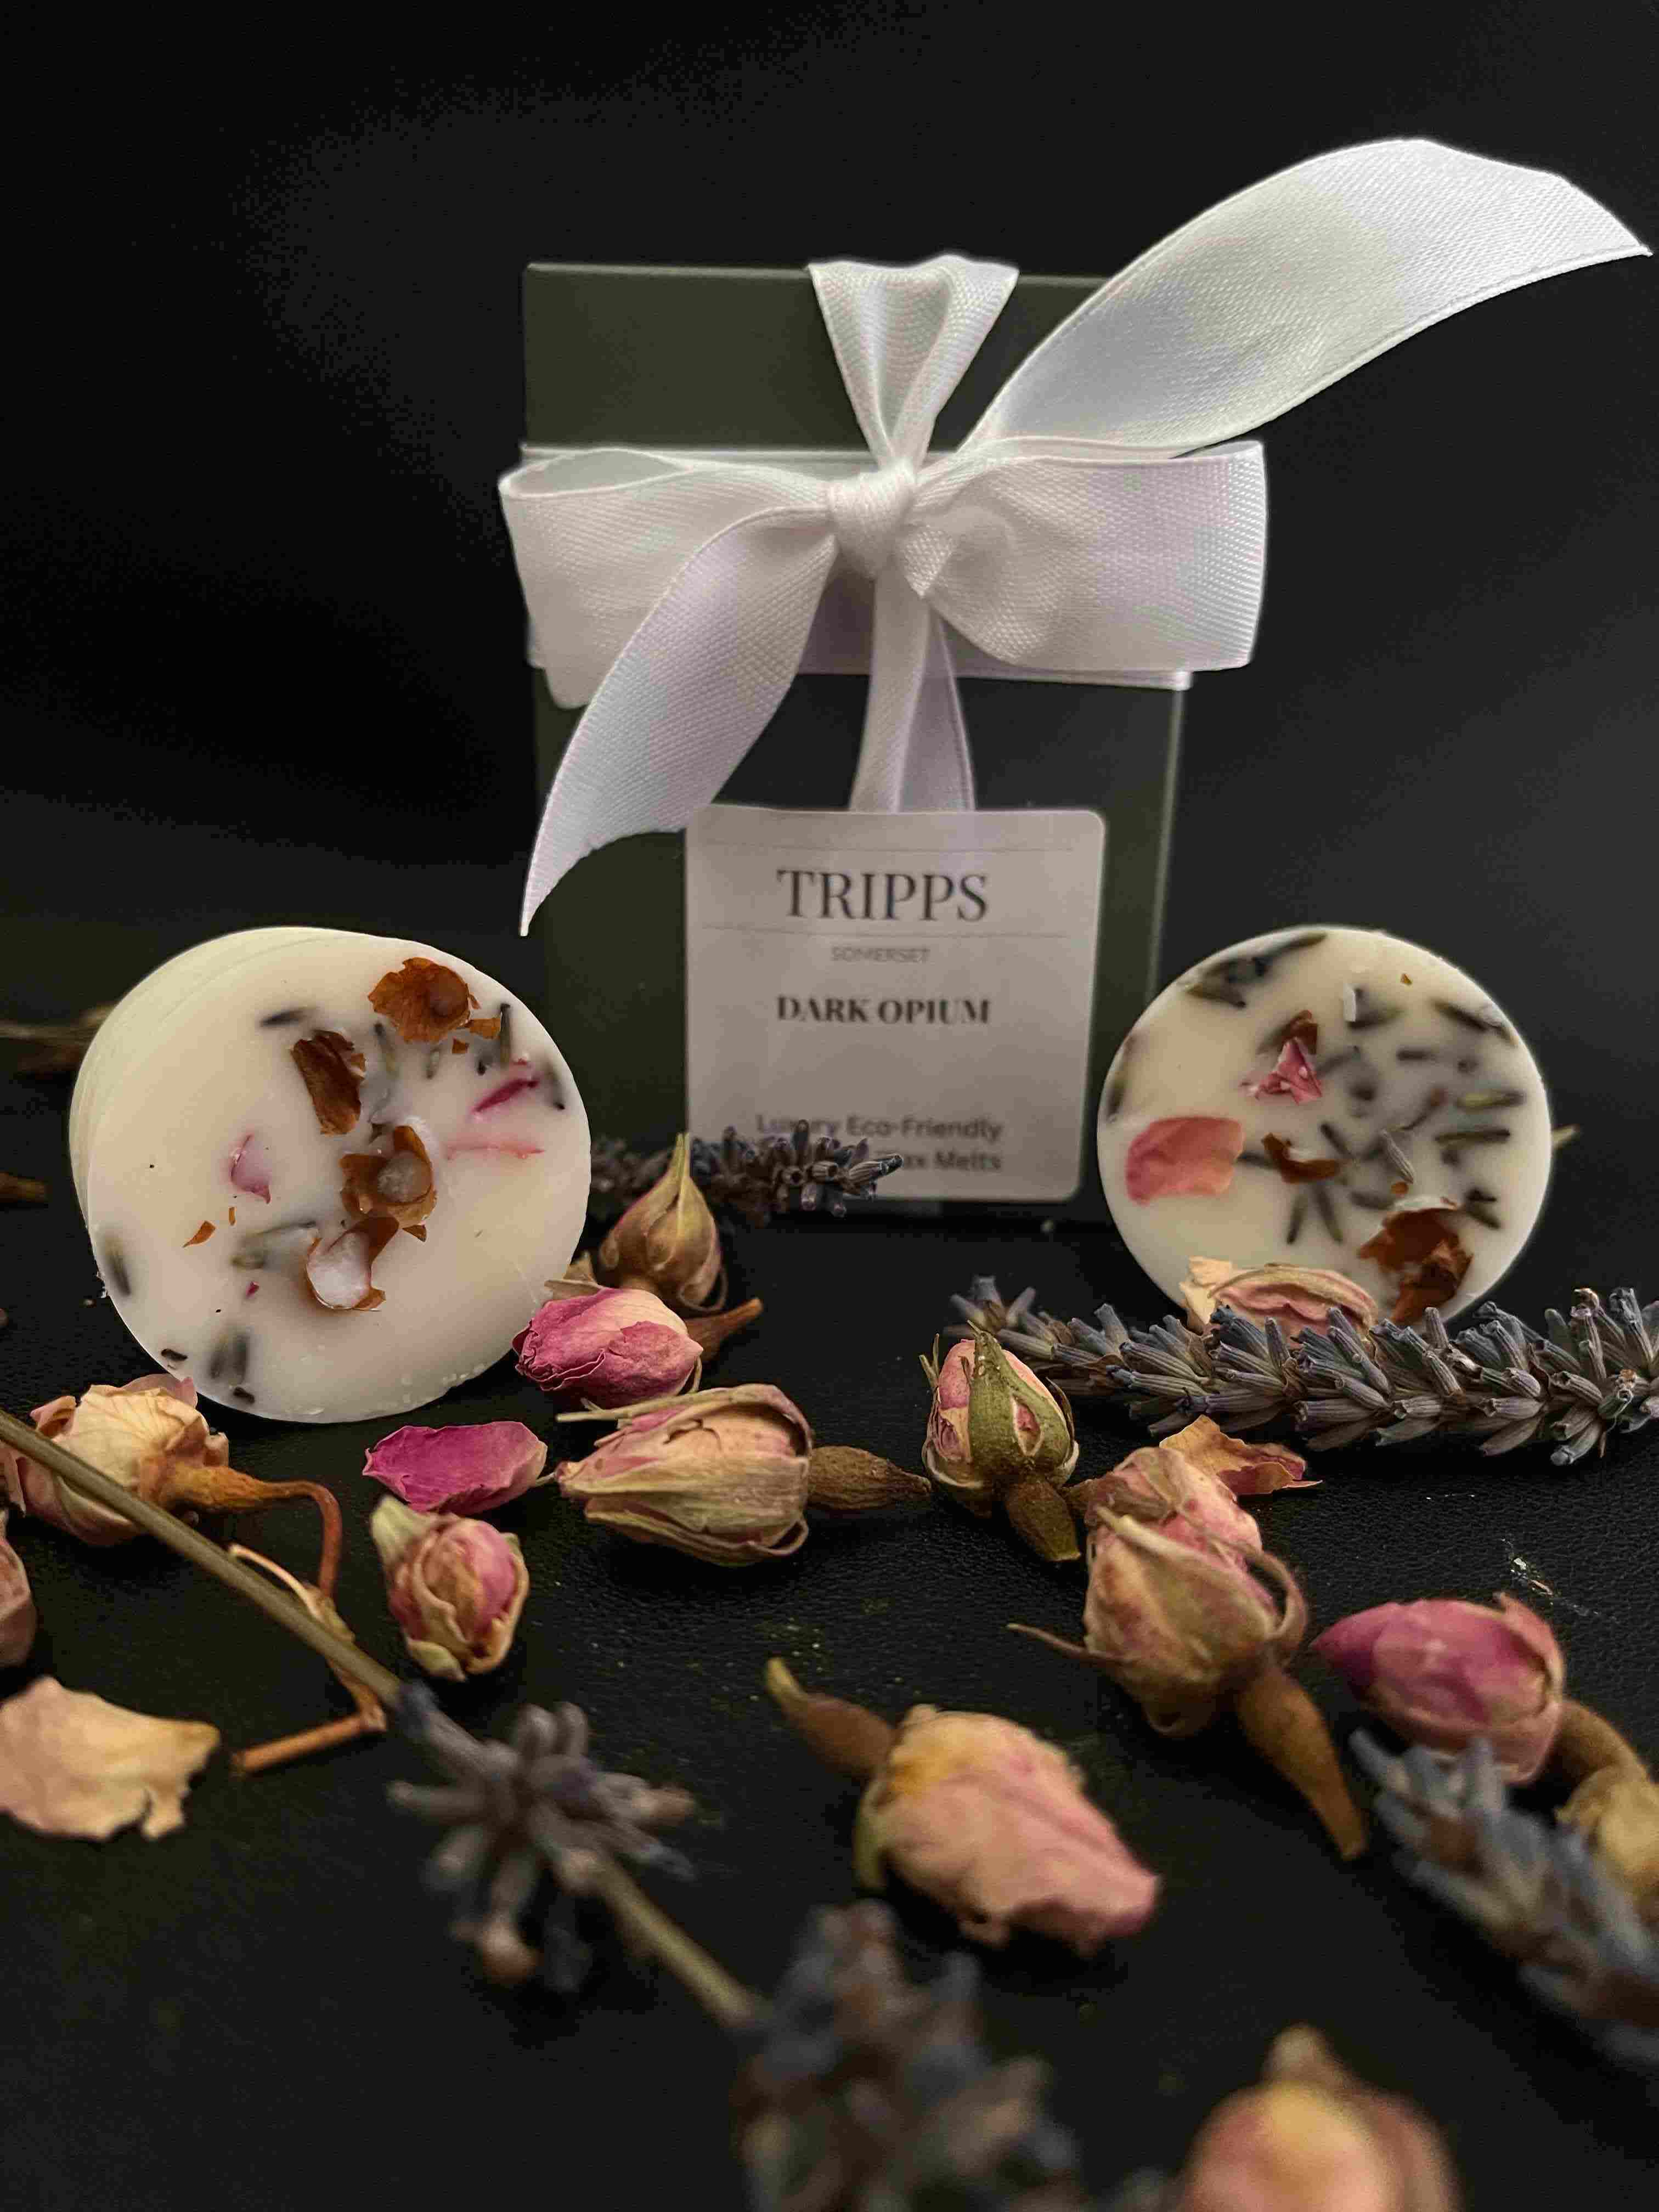 Tripps Candles Shines at Trago Mills: A Weekend of Sustainable Luxury and Exquisite Scents